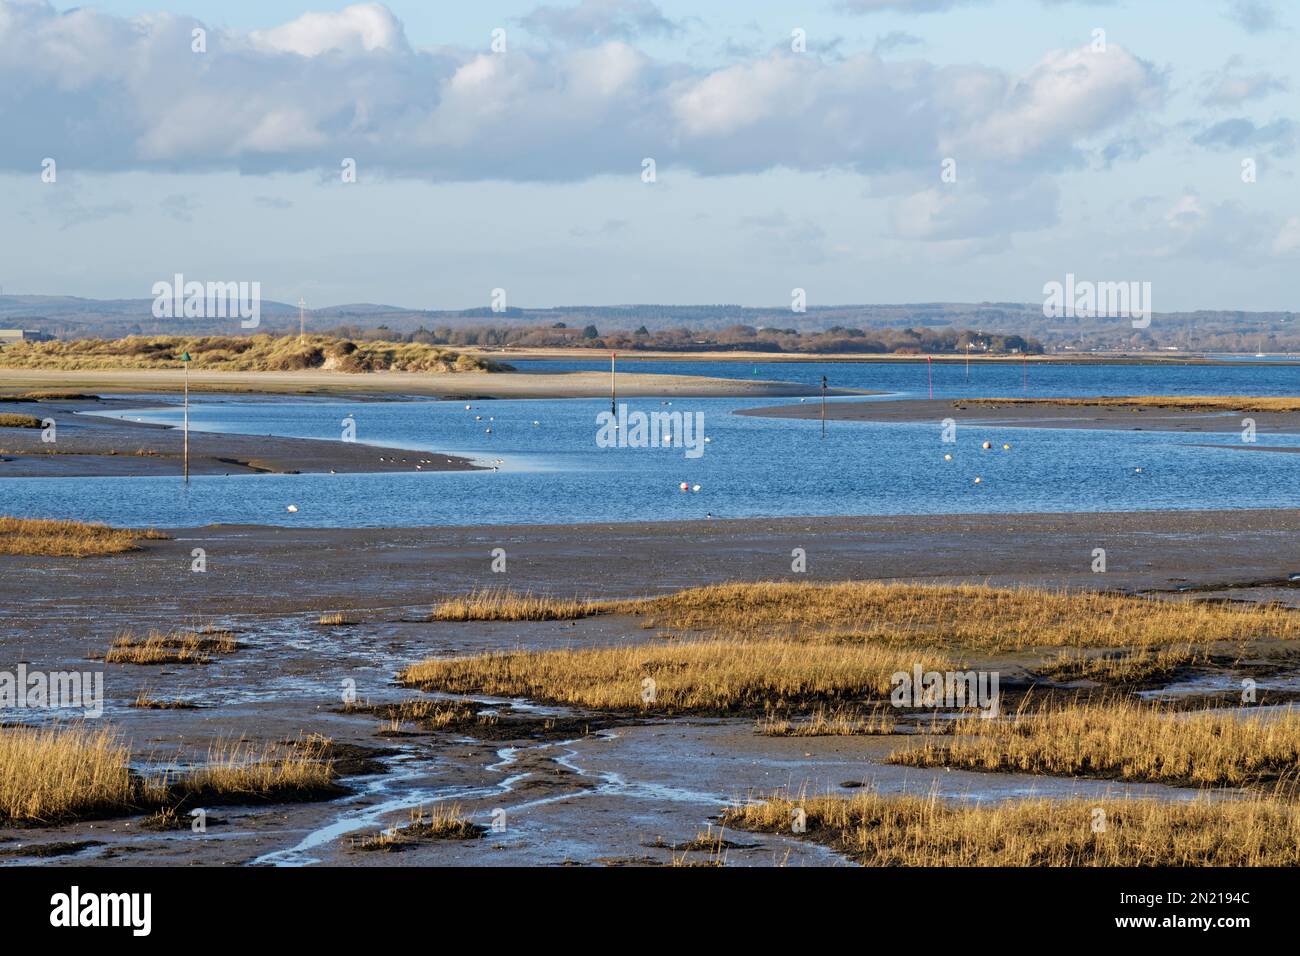 View to East Head across Snowhill creek and saltmarshes with stands of Cord grass (Spartina sp.) near West Wittering, Chichester Harbour, Hampshire UK Stock Photo